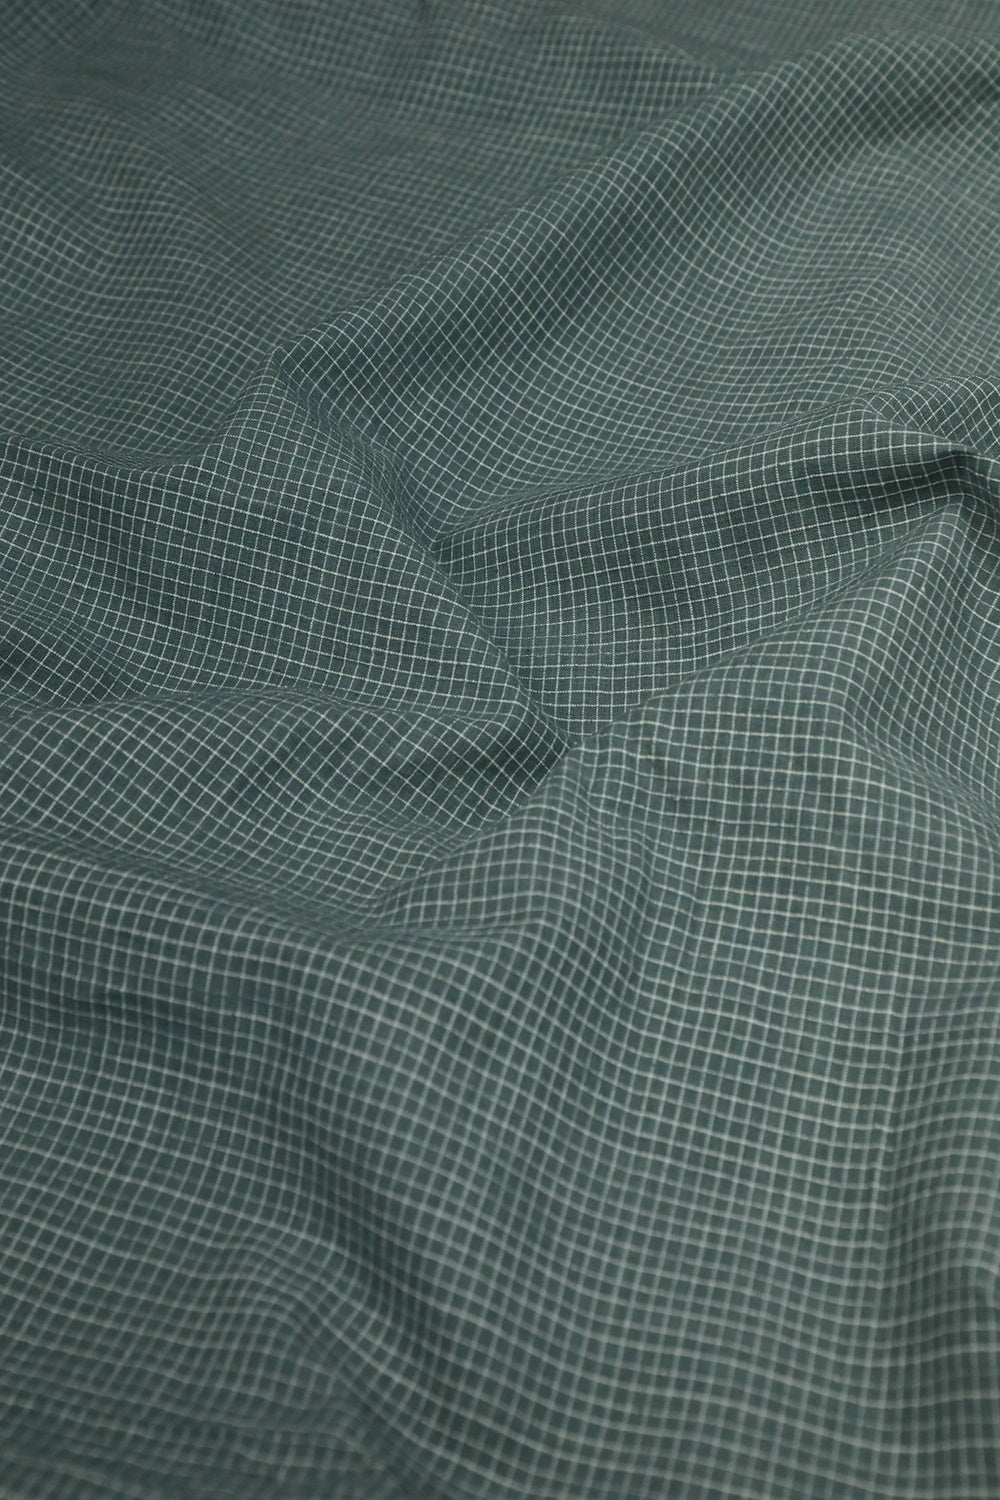 Micro Checkered on Green Bengal Handwoven Cotton Fabric